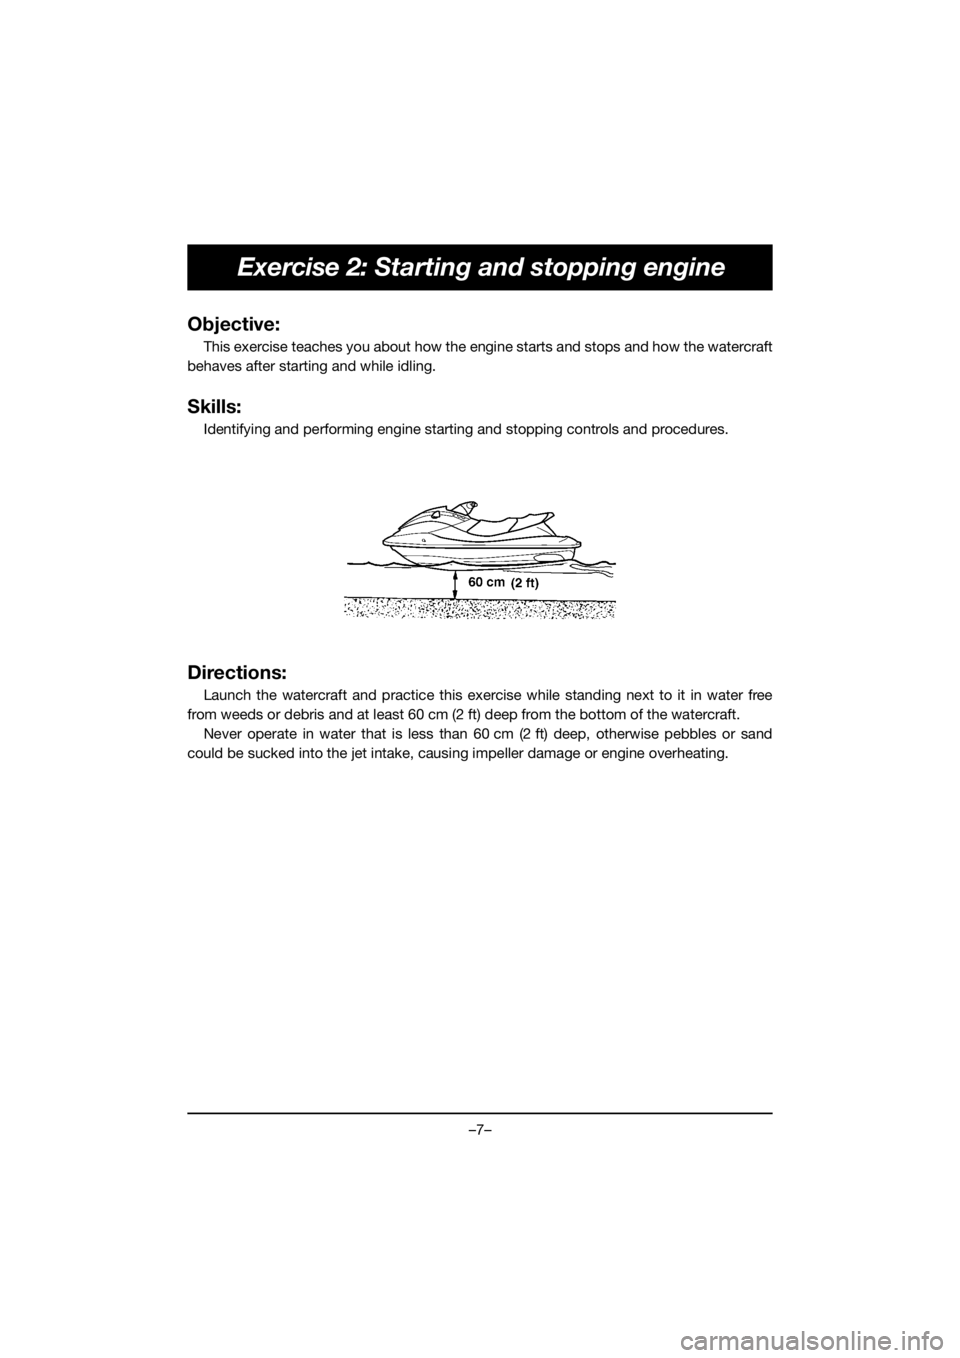 YAMAHA EX DELUXE 2019  Betriebsanleitungen (in German) –7–
Exercise 2: Starting and stopping engine
Objective:
This exercise teaches you about how the engine starts and stops and how the watercraft
behaves after starting and while idling.
Skills:
Iden